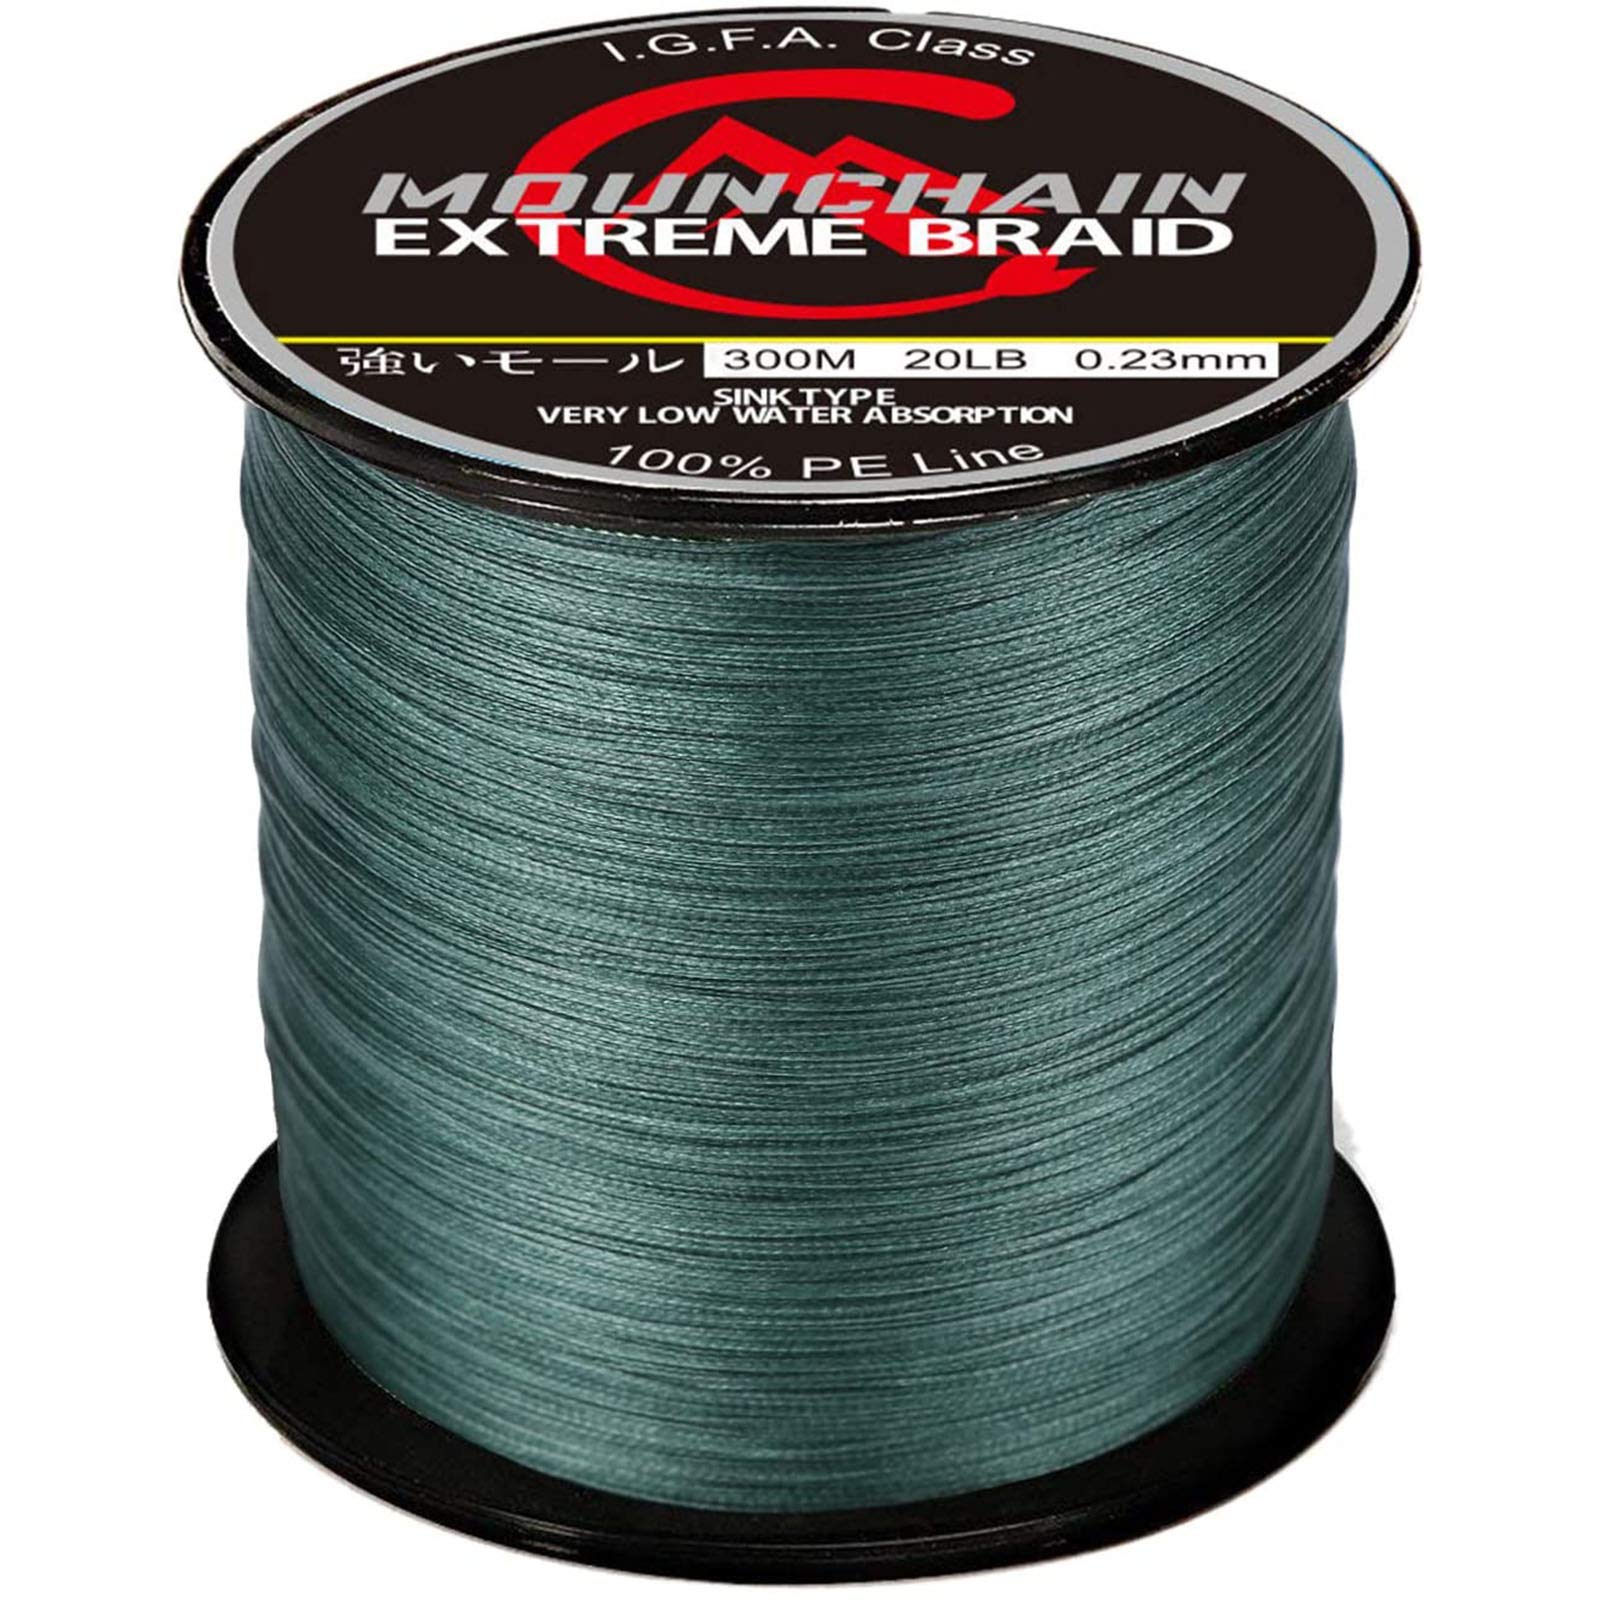 Super Strong Fishing Line - 500m/1640ft 4-Strand Multifilament PE Anti-abrasion  Braided Line for Smooth Long Casting, Available in 10-80 LB Options, braided  fishing line 